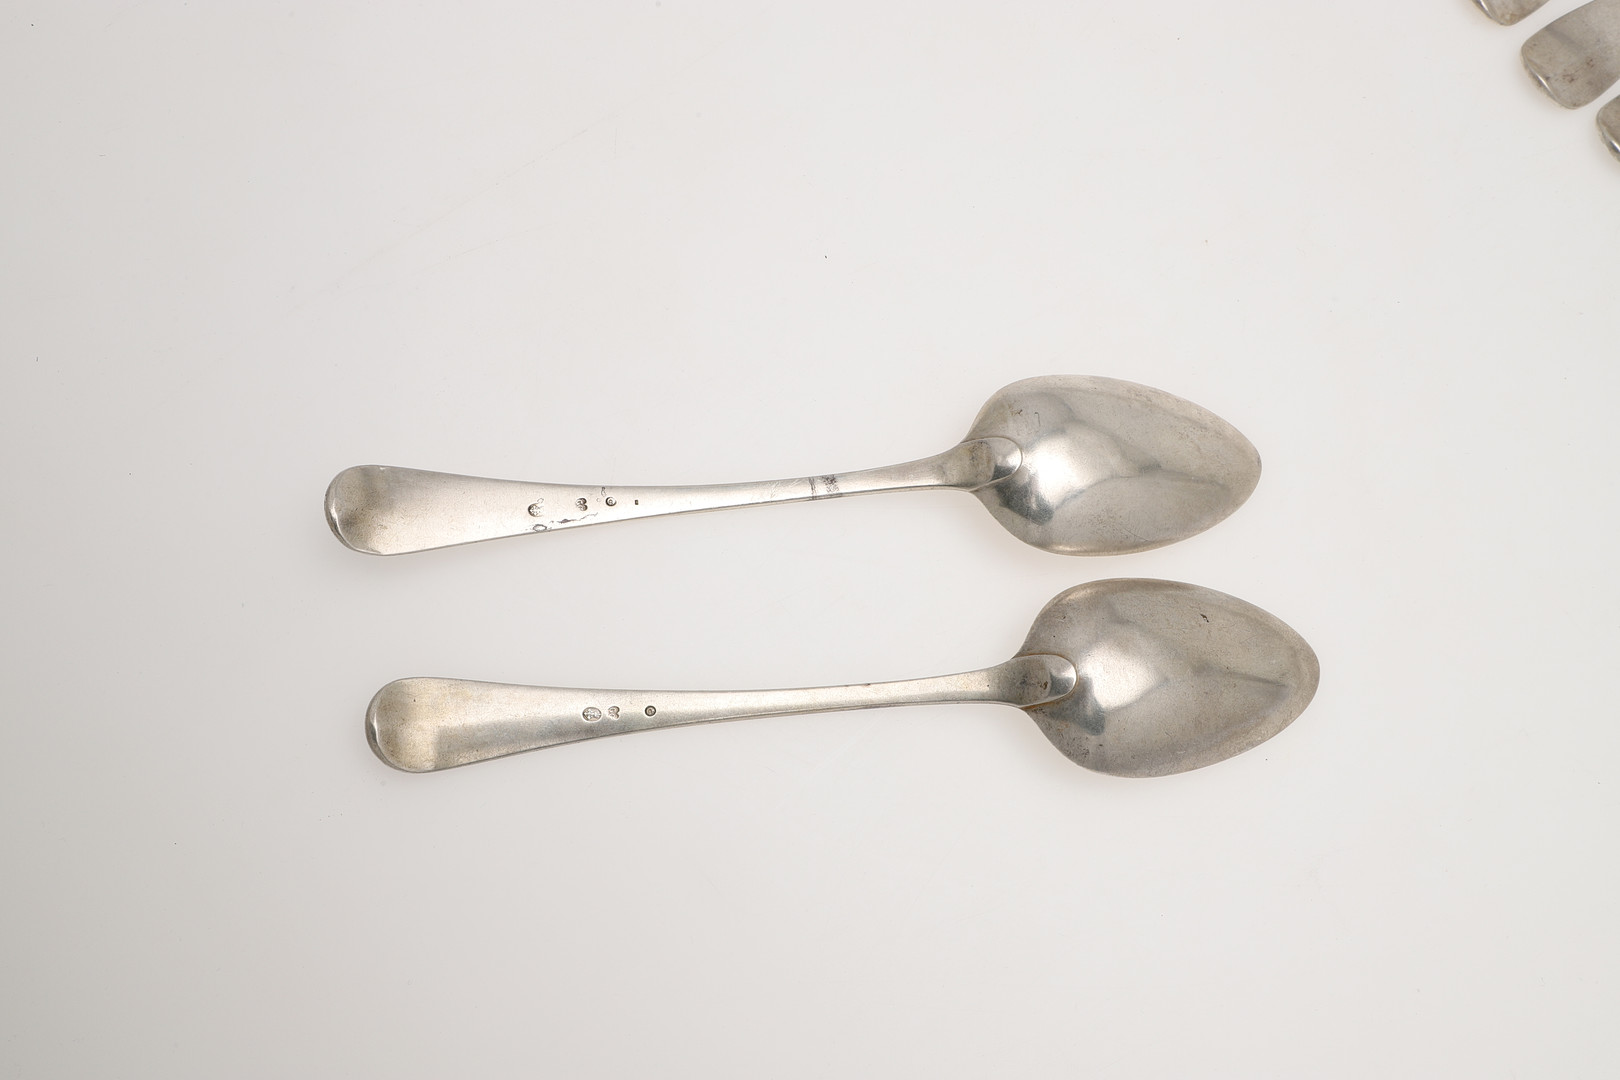 LATE 18TH/ EARLY 19TH CENTURY ITALIAN SILVER FLATWARE. - Image 11 of 15